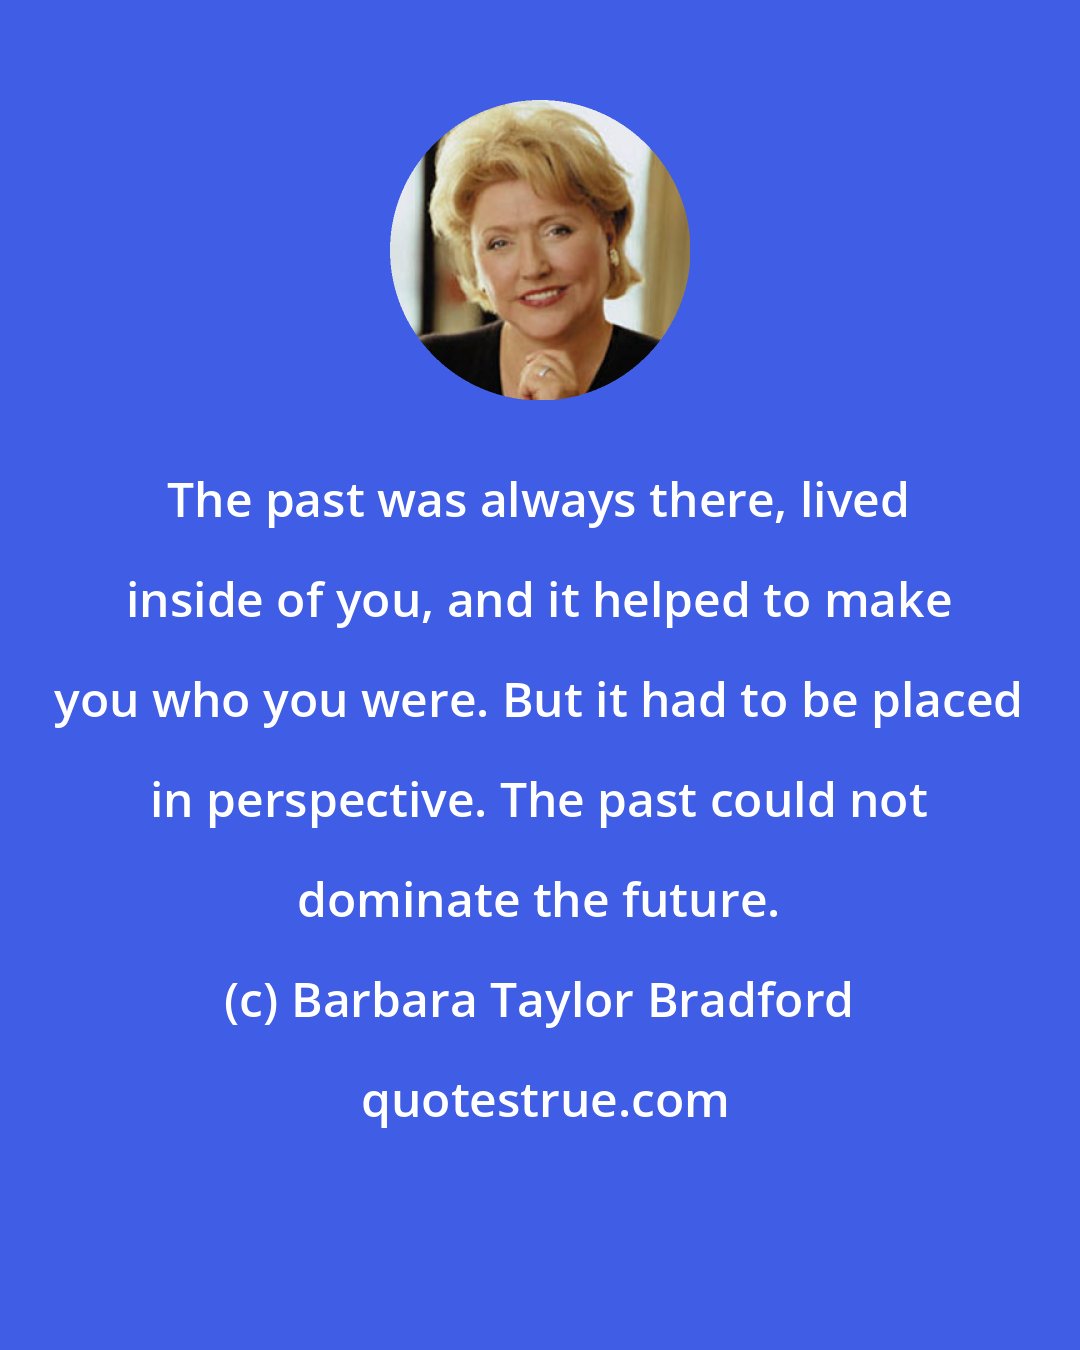 Barbara Taylor Bradford: The past was always there, lived inside of you, and it helped to make you who you were. But it had to be placed in perspective. The past could not dominate the future.